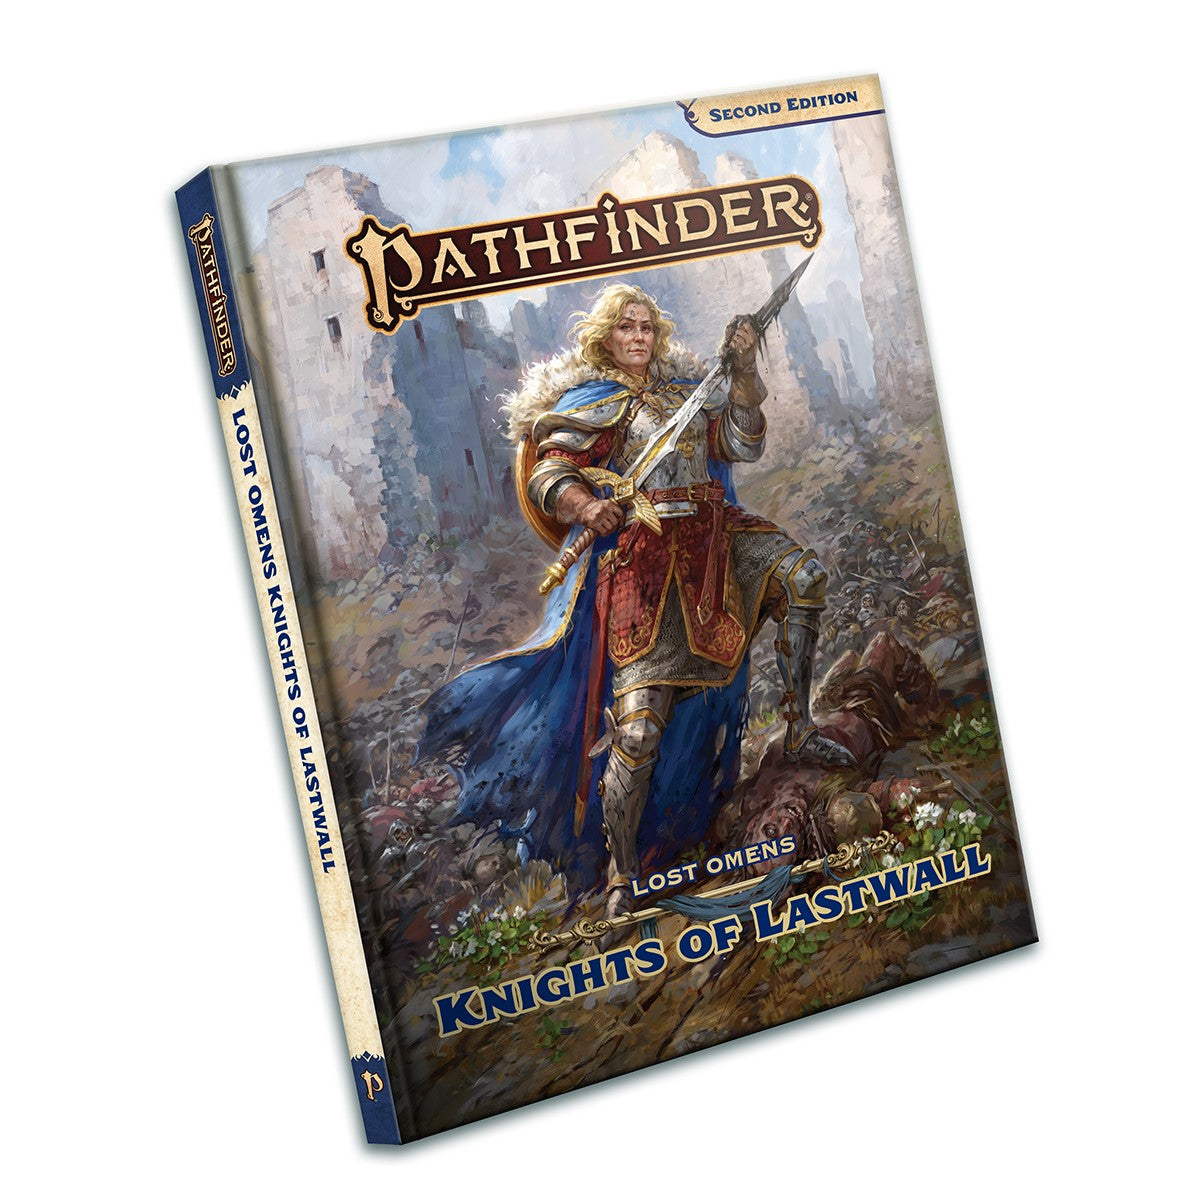 Pathfinder Second Edition: Knights of Lastwall